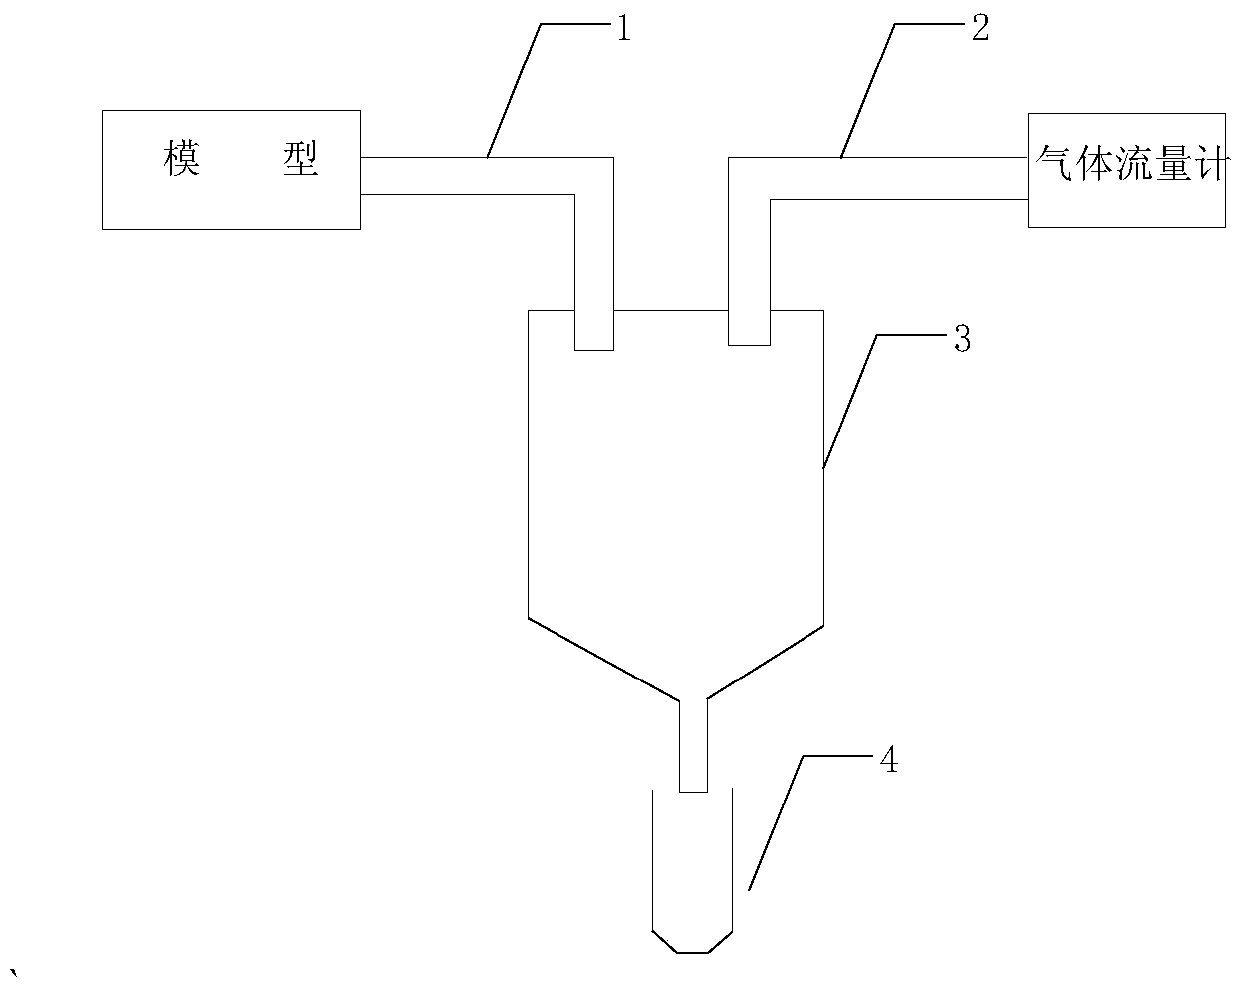 Multistage gas-liquid two-phase separation device